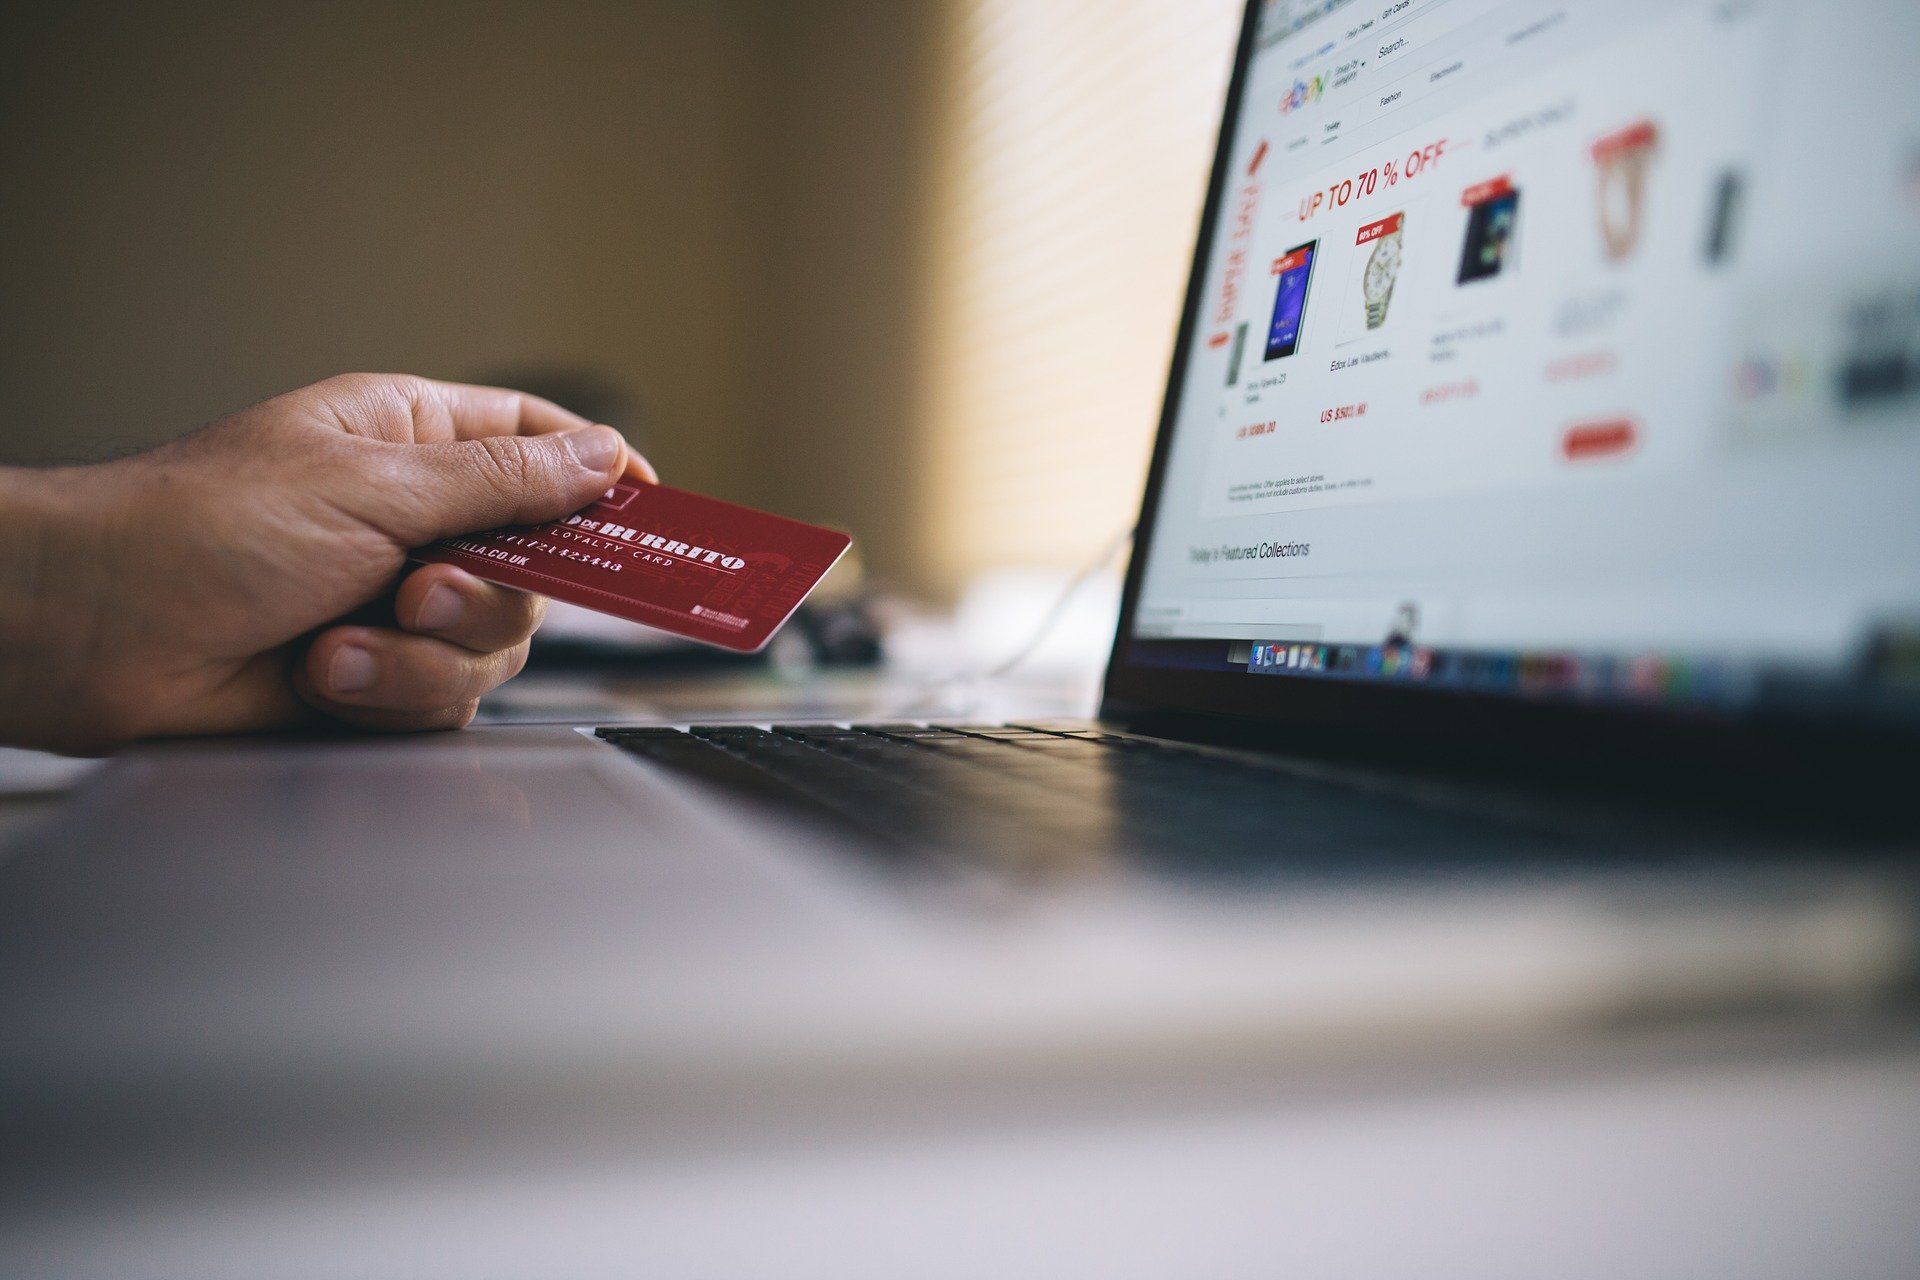 Centre proposes changes to e-commerce rules. Check details